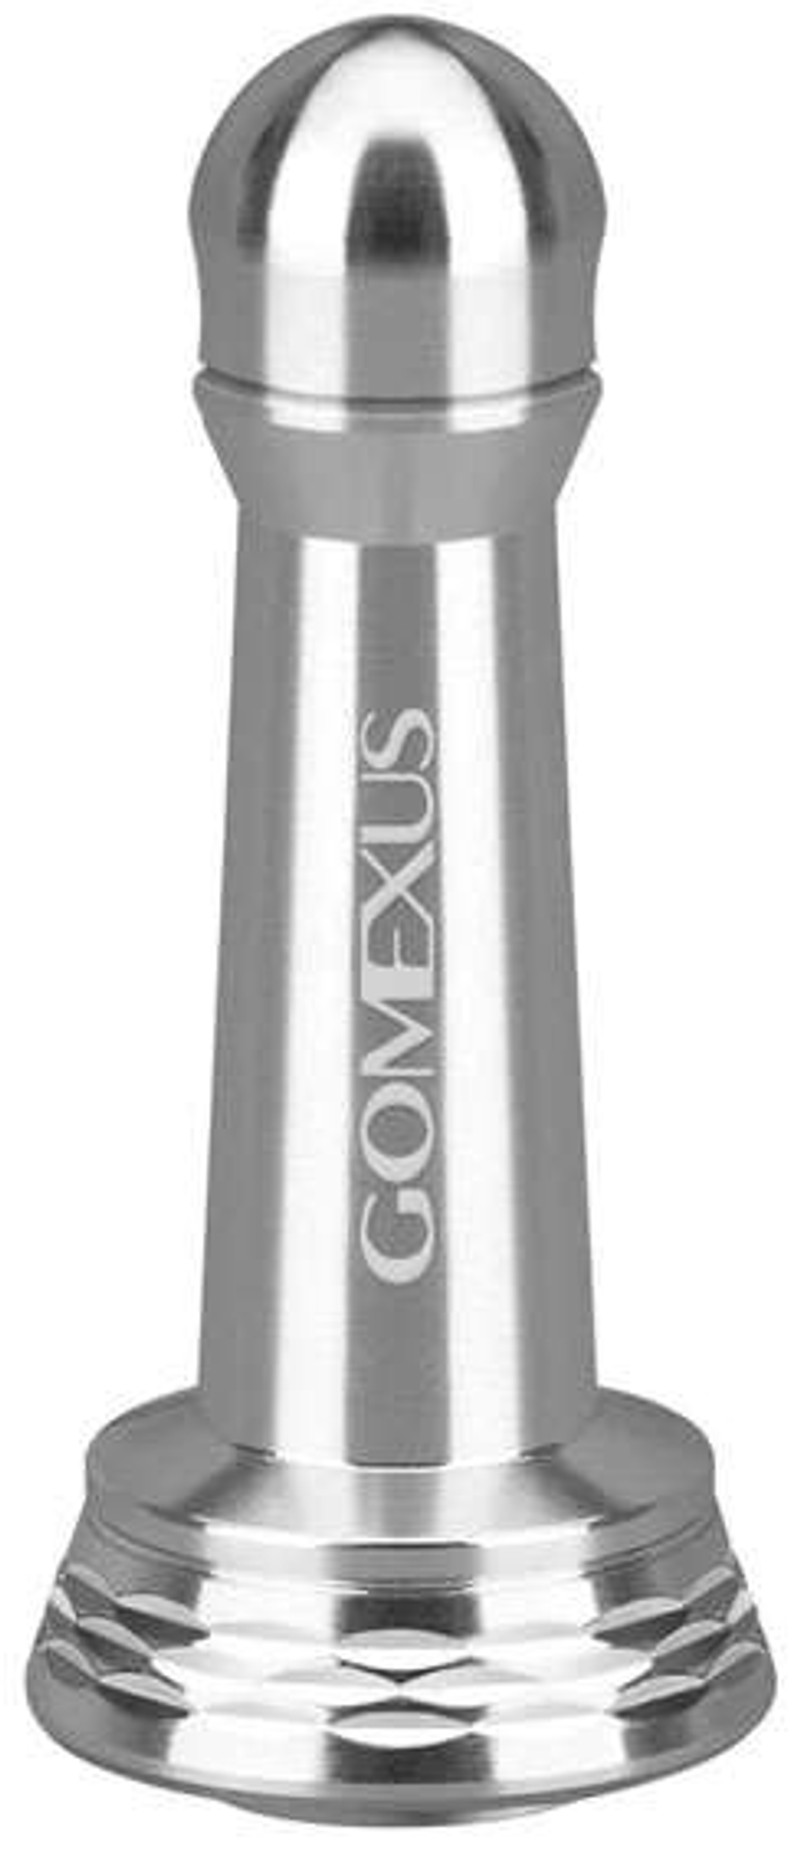 Gomexus Reel Stand R1 42mm - Silver